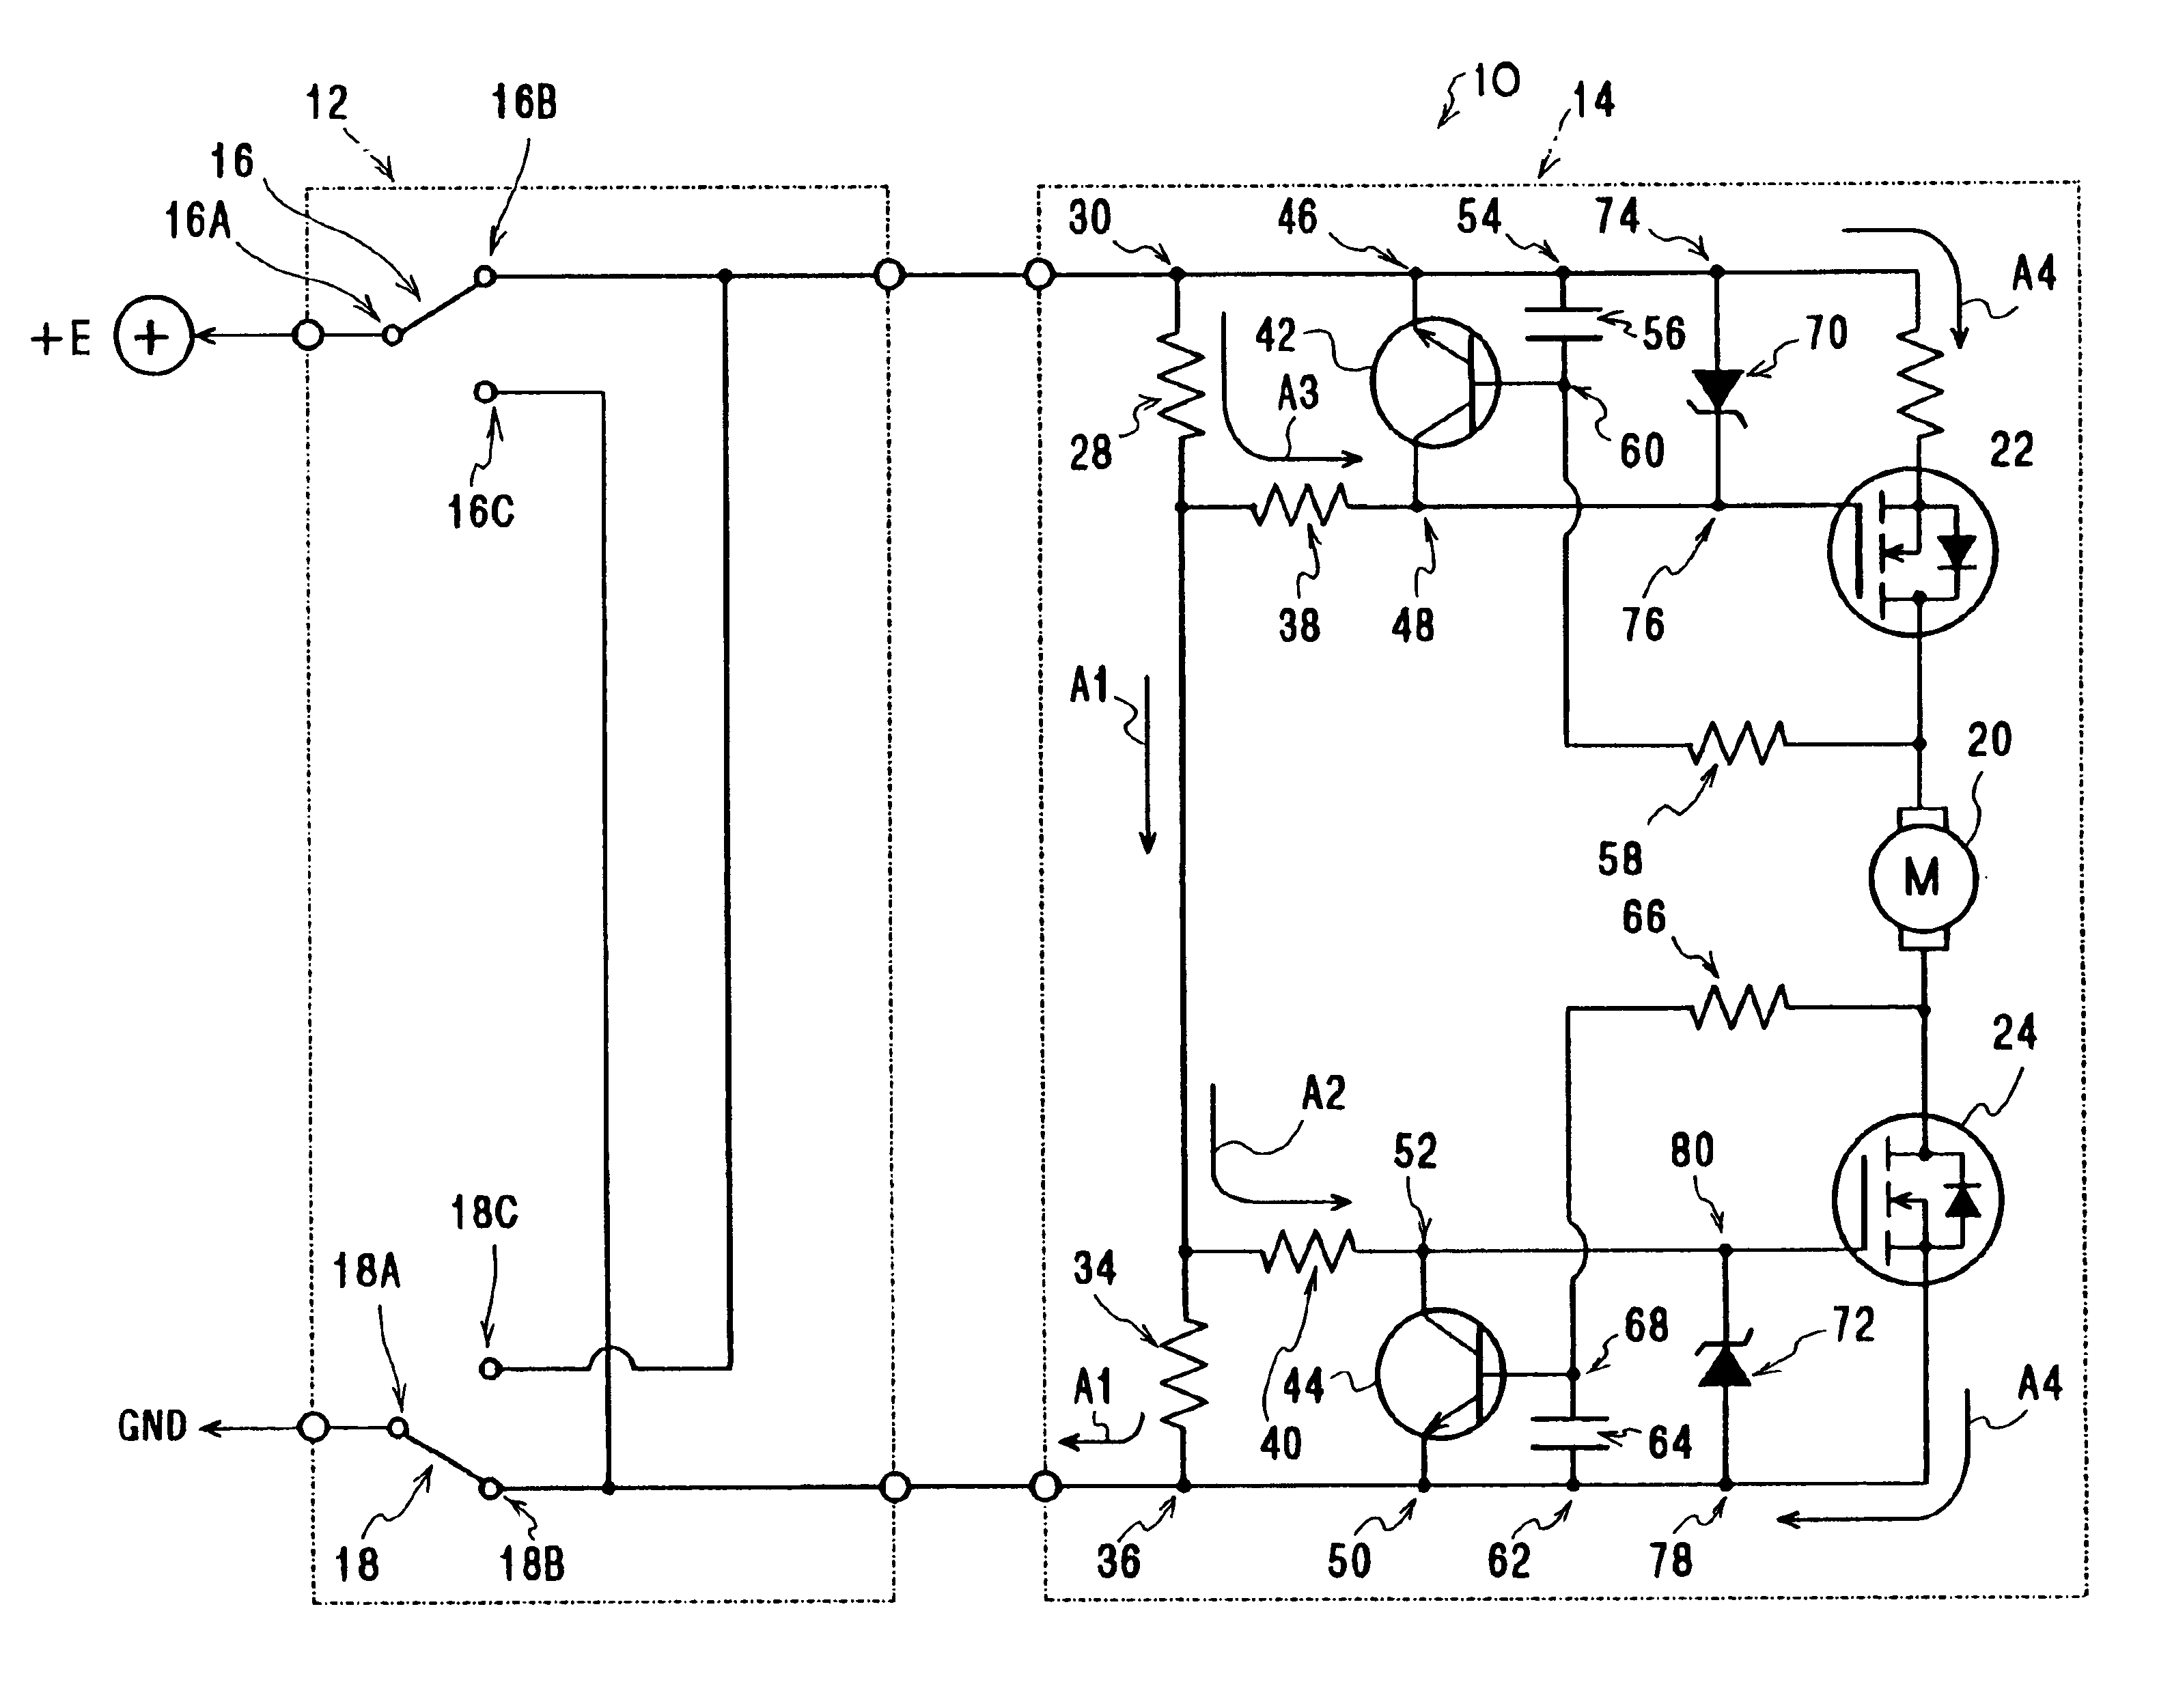 Motor control circuit for mirror device